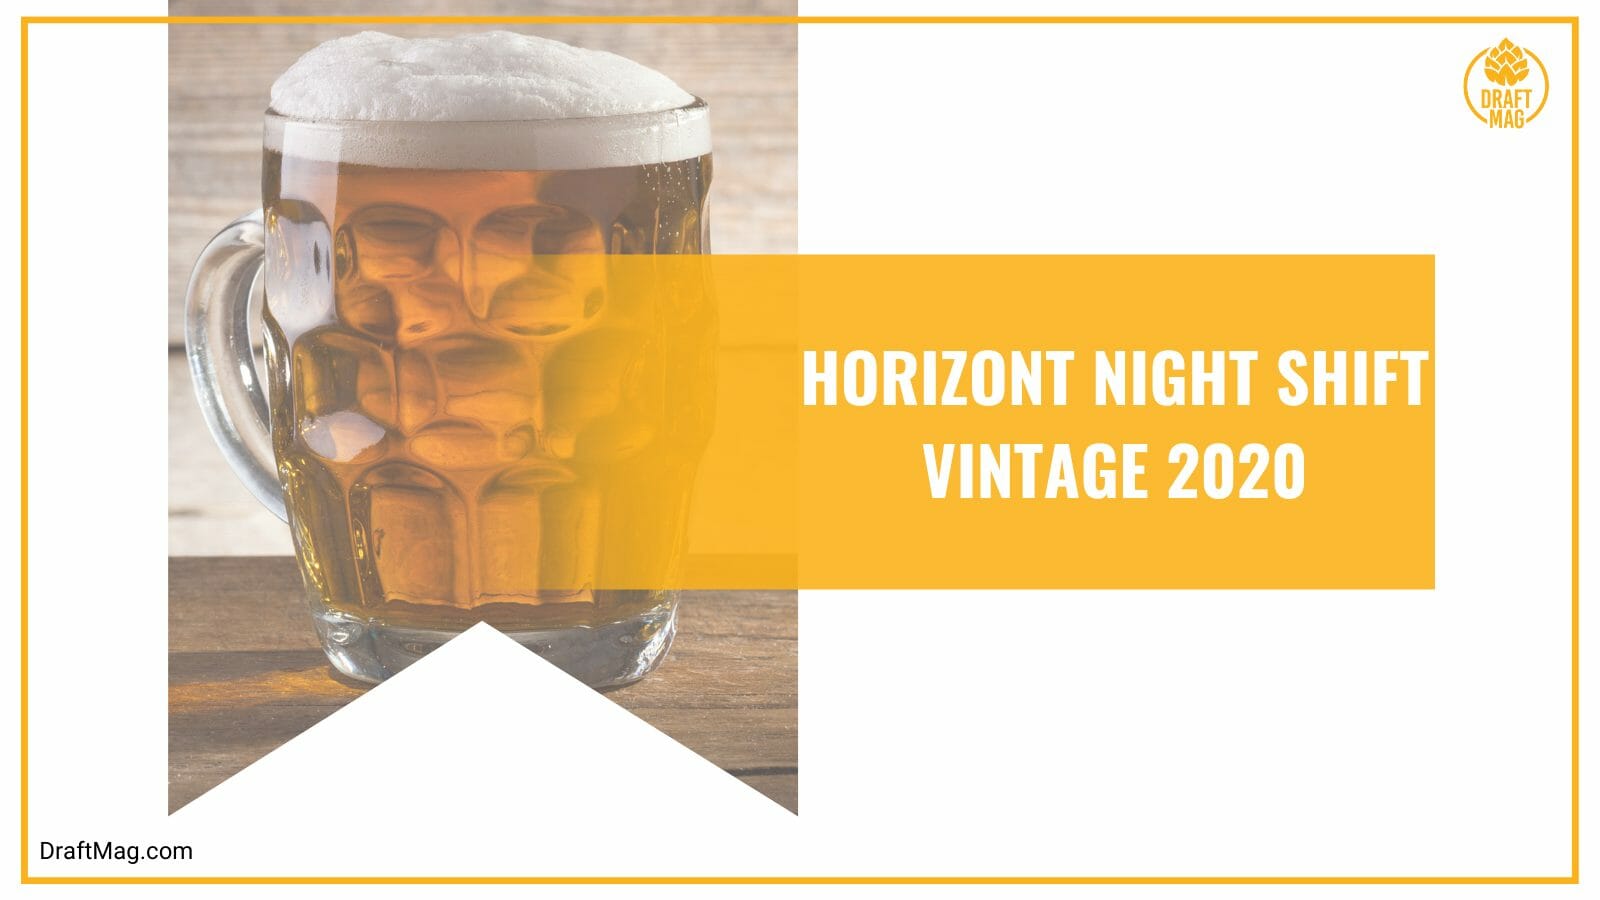 Horizont night shift vintage russian imperial stout